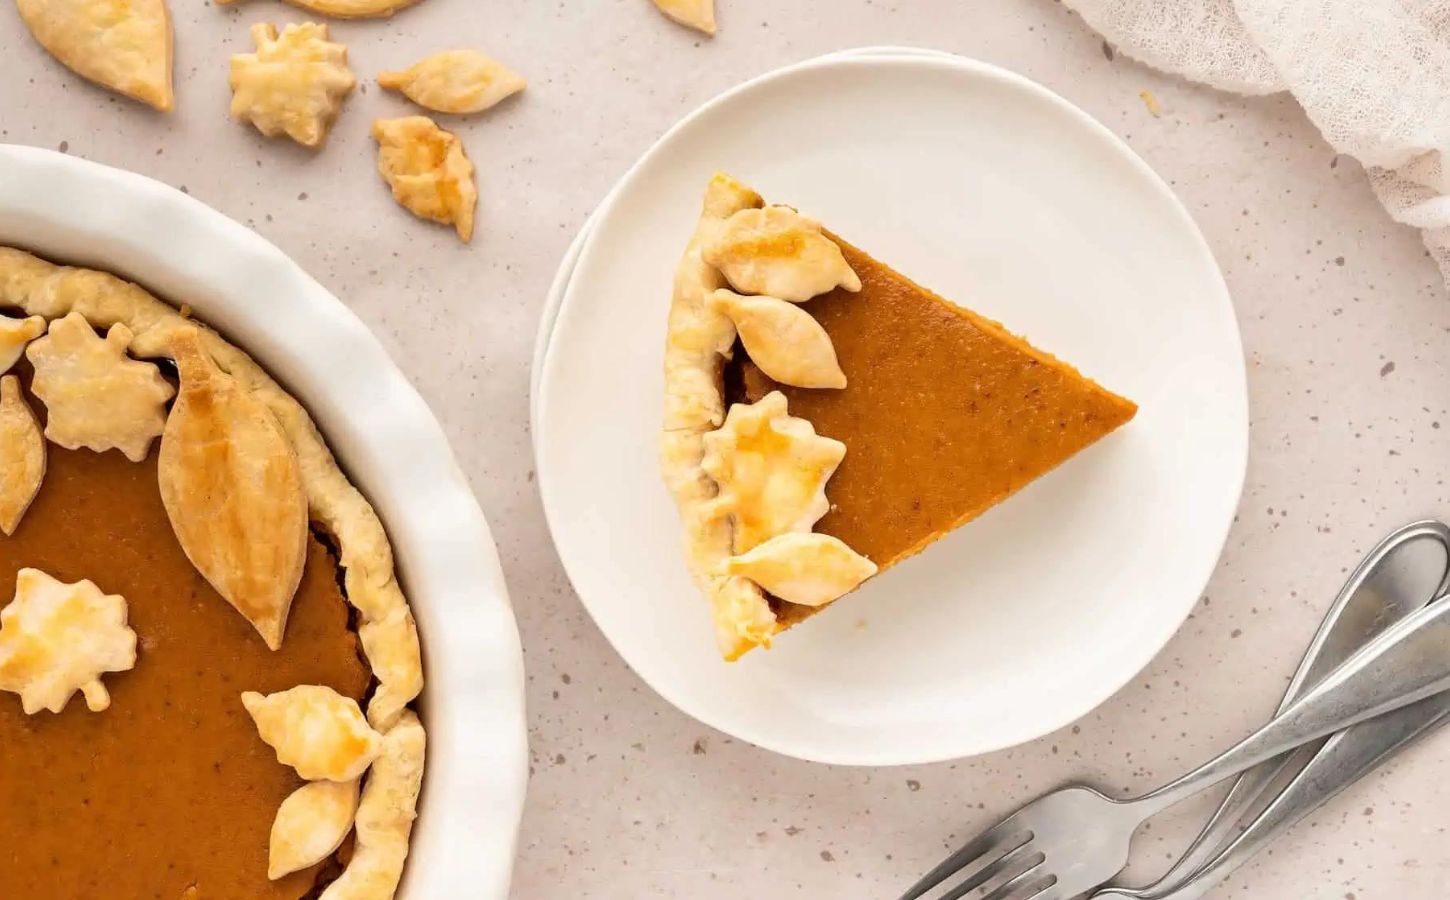 This egg-free and dairy-free sweet potato pie recipe is completely vegan